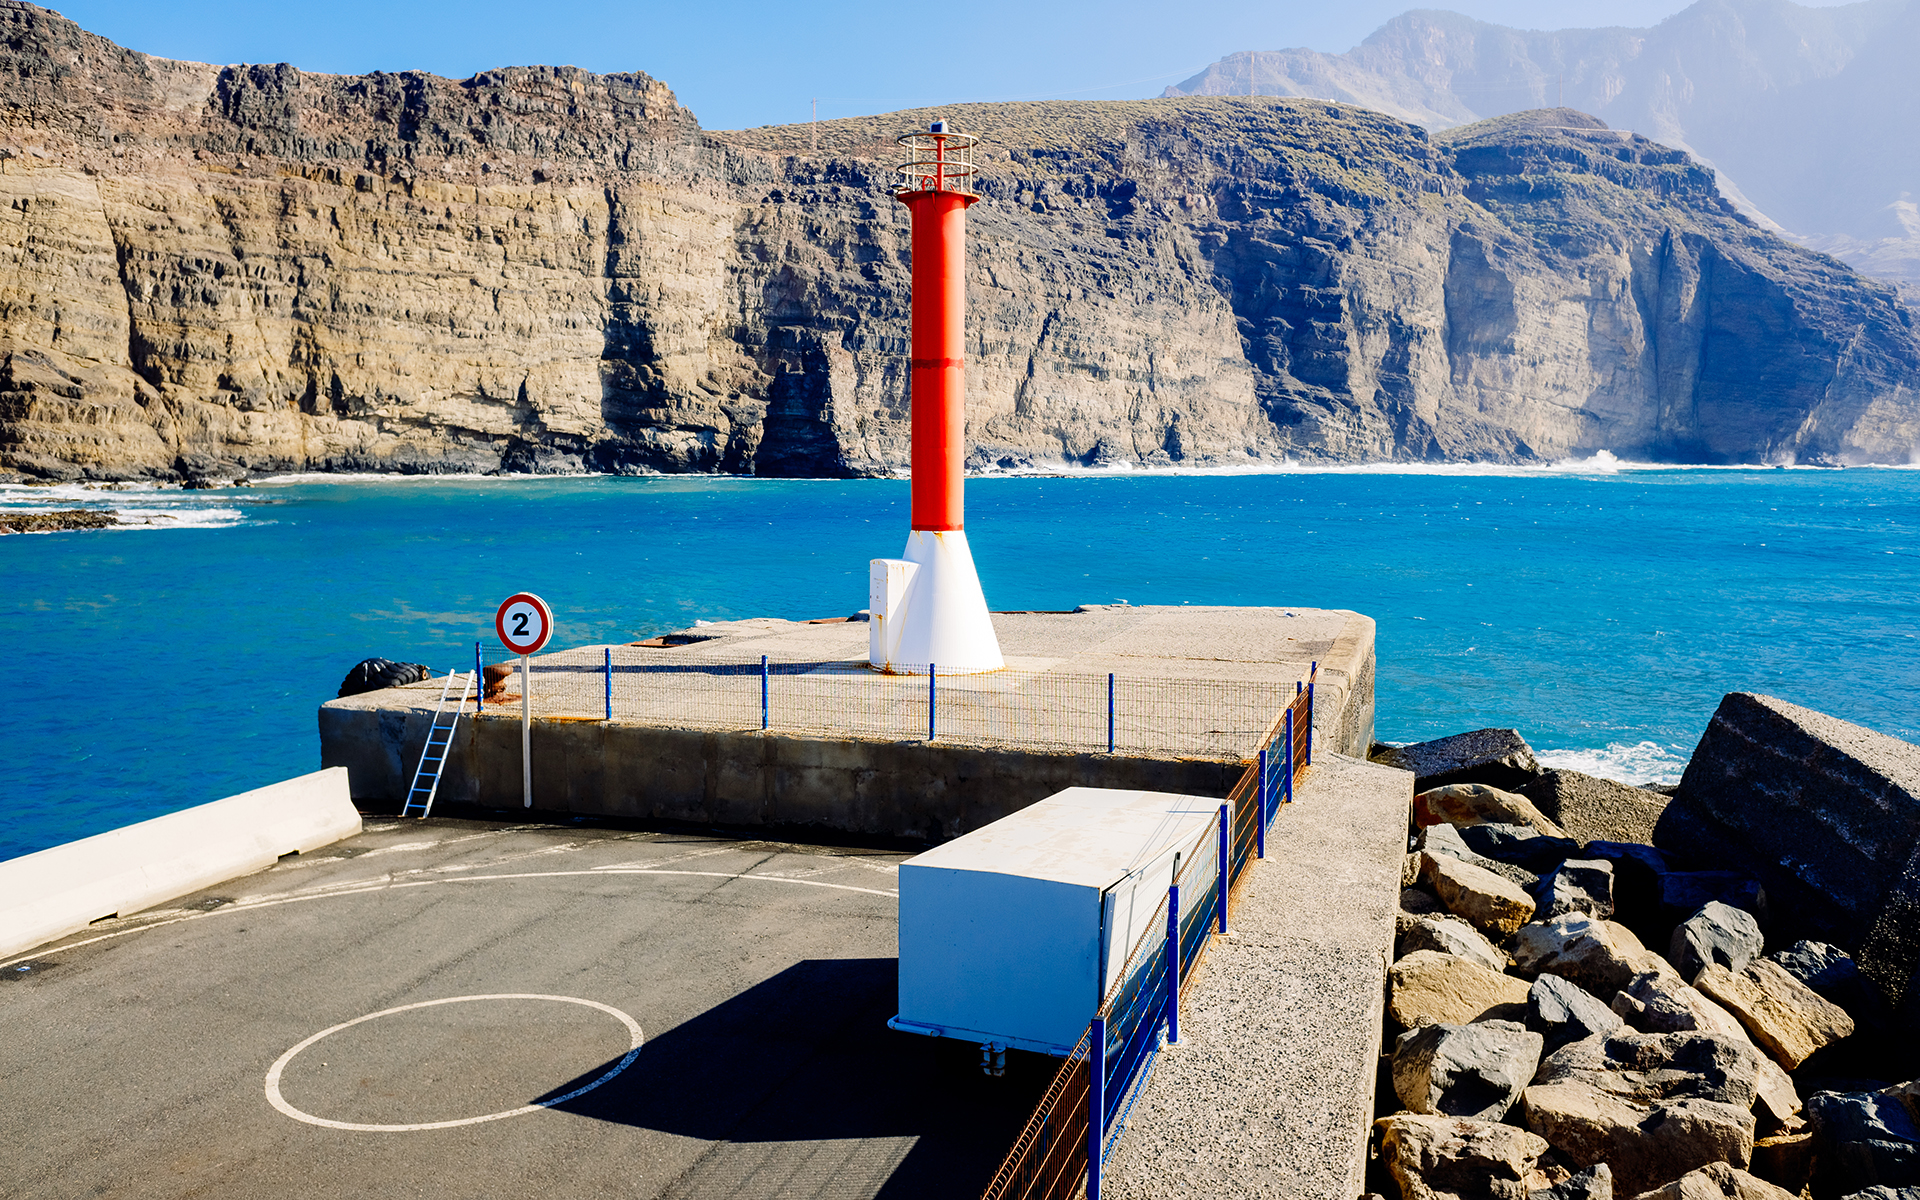 Entrance to the mouth of the port of Agaete with the beautiful c